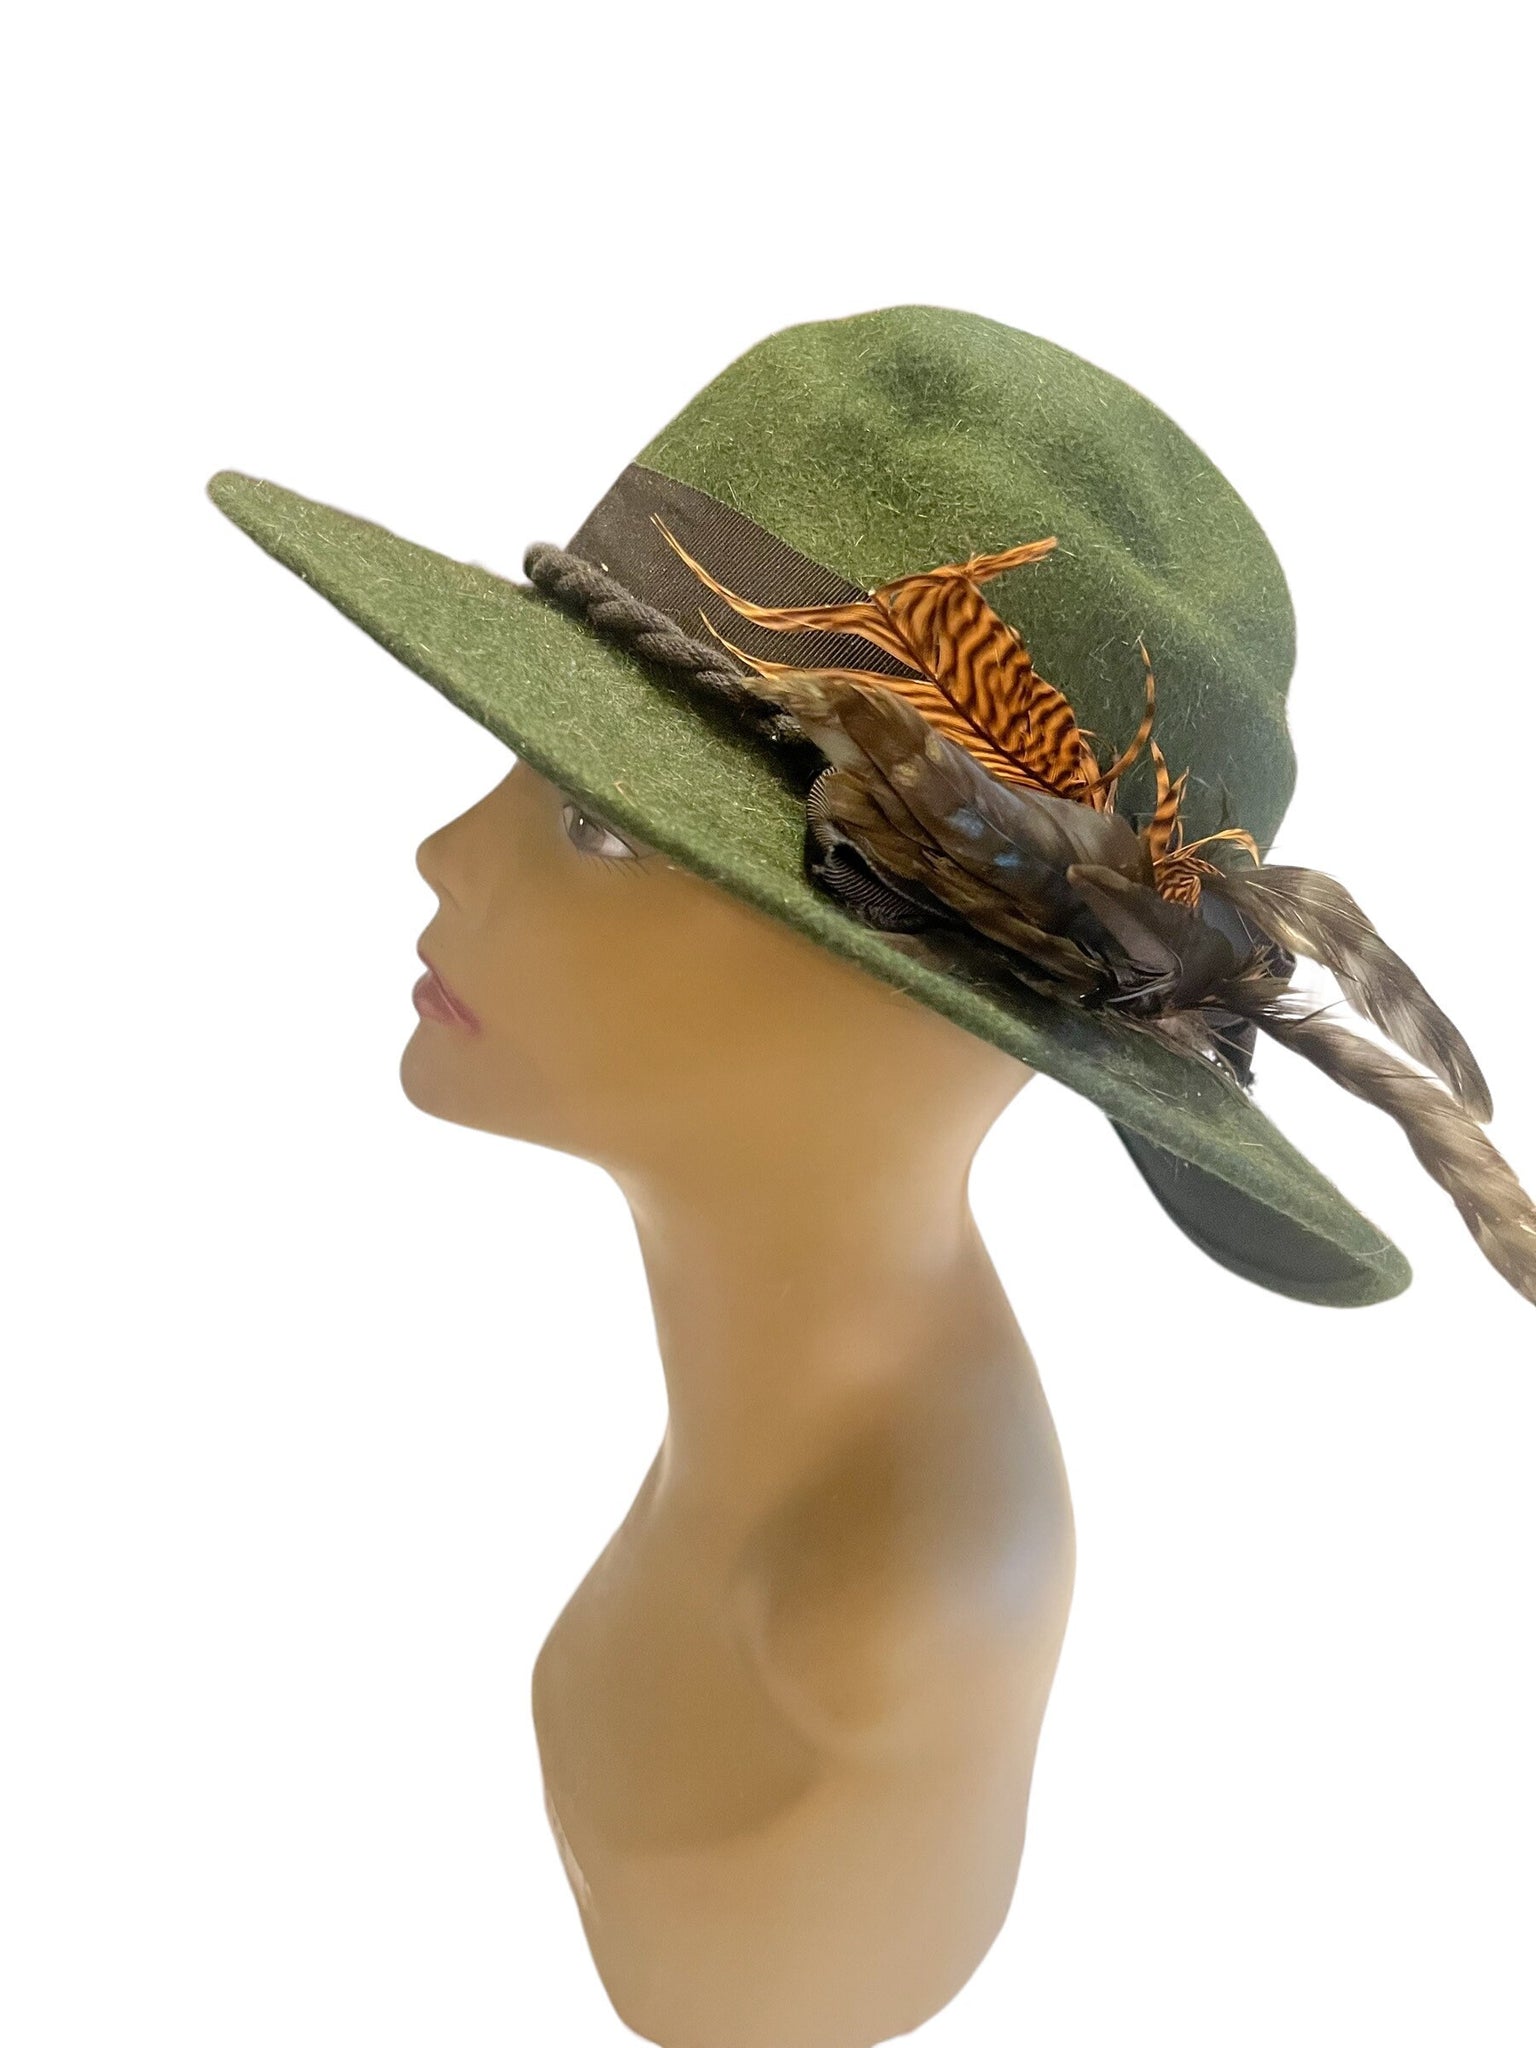 Vintage green fedora hat with feathers